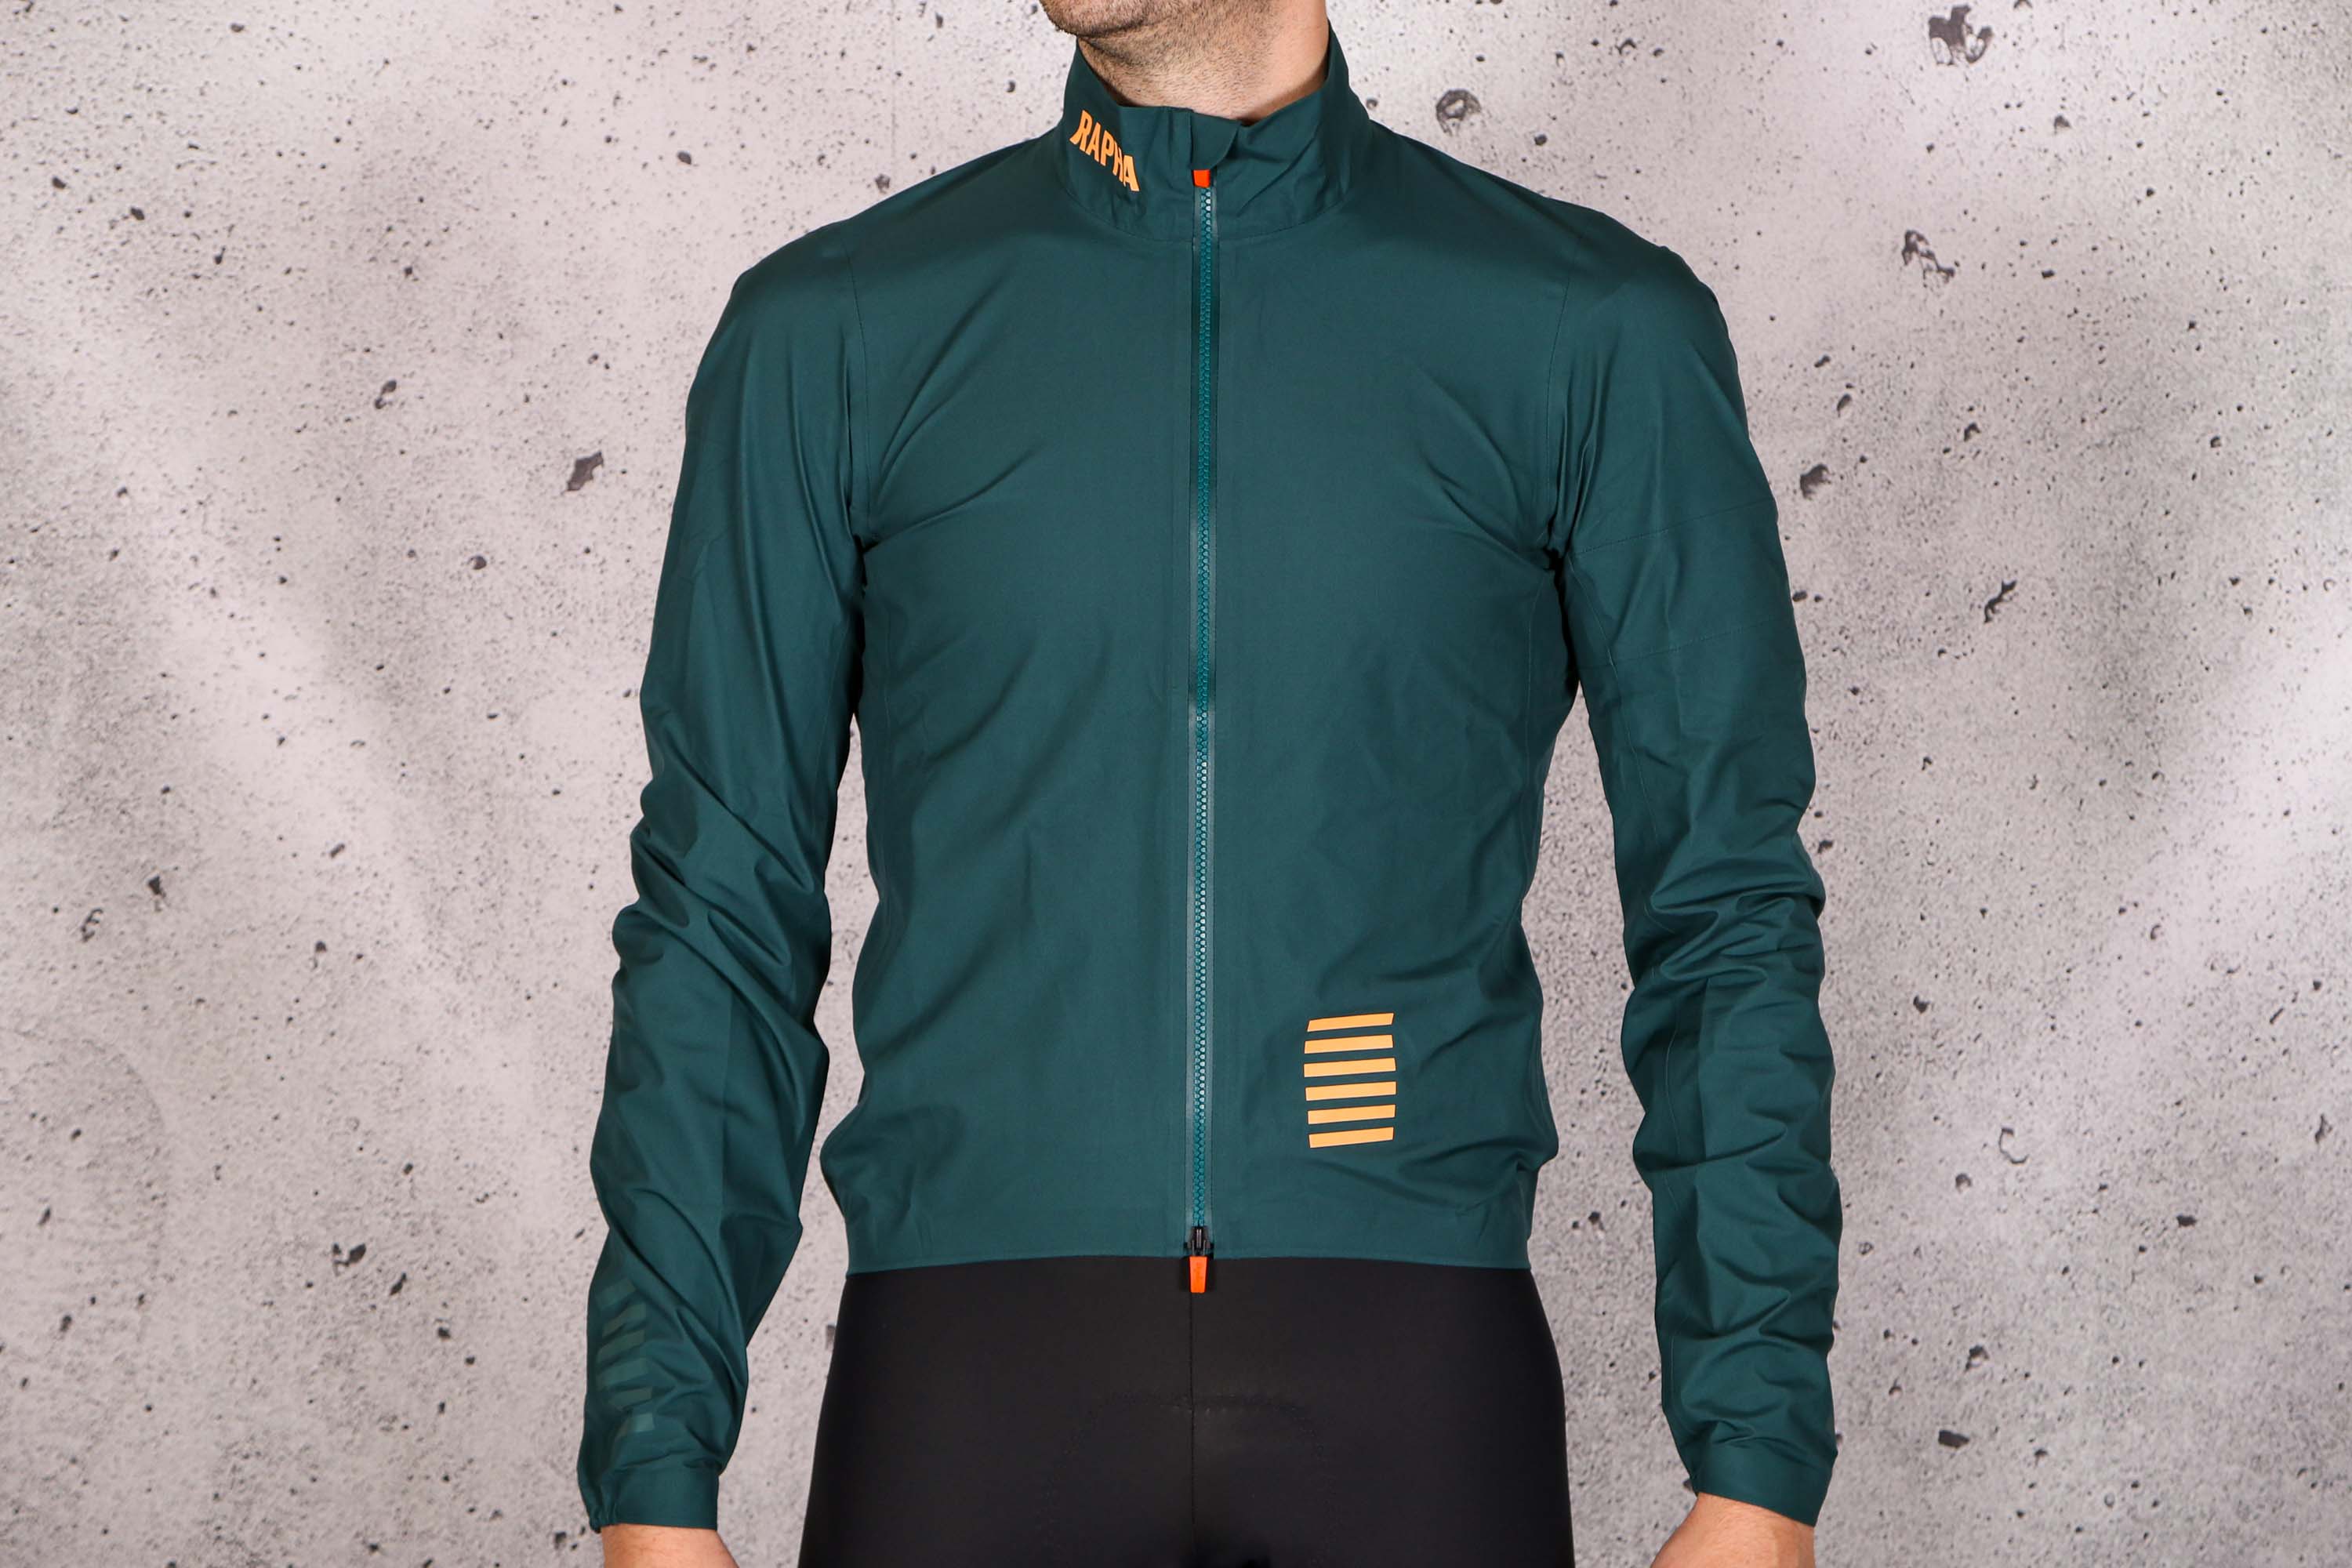 oosters buurman Spin Review: Rapha Men's Pro Team Gore-Tex Rain Jacket | road.cc